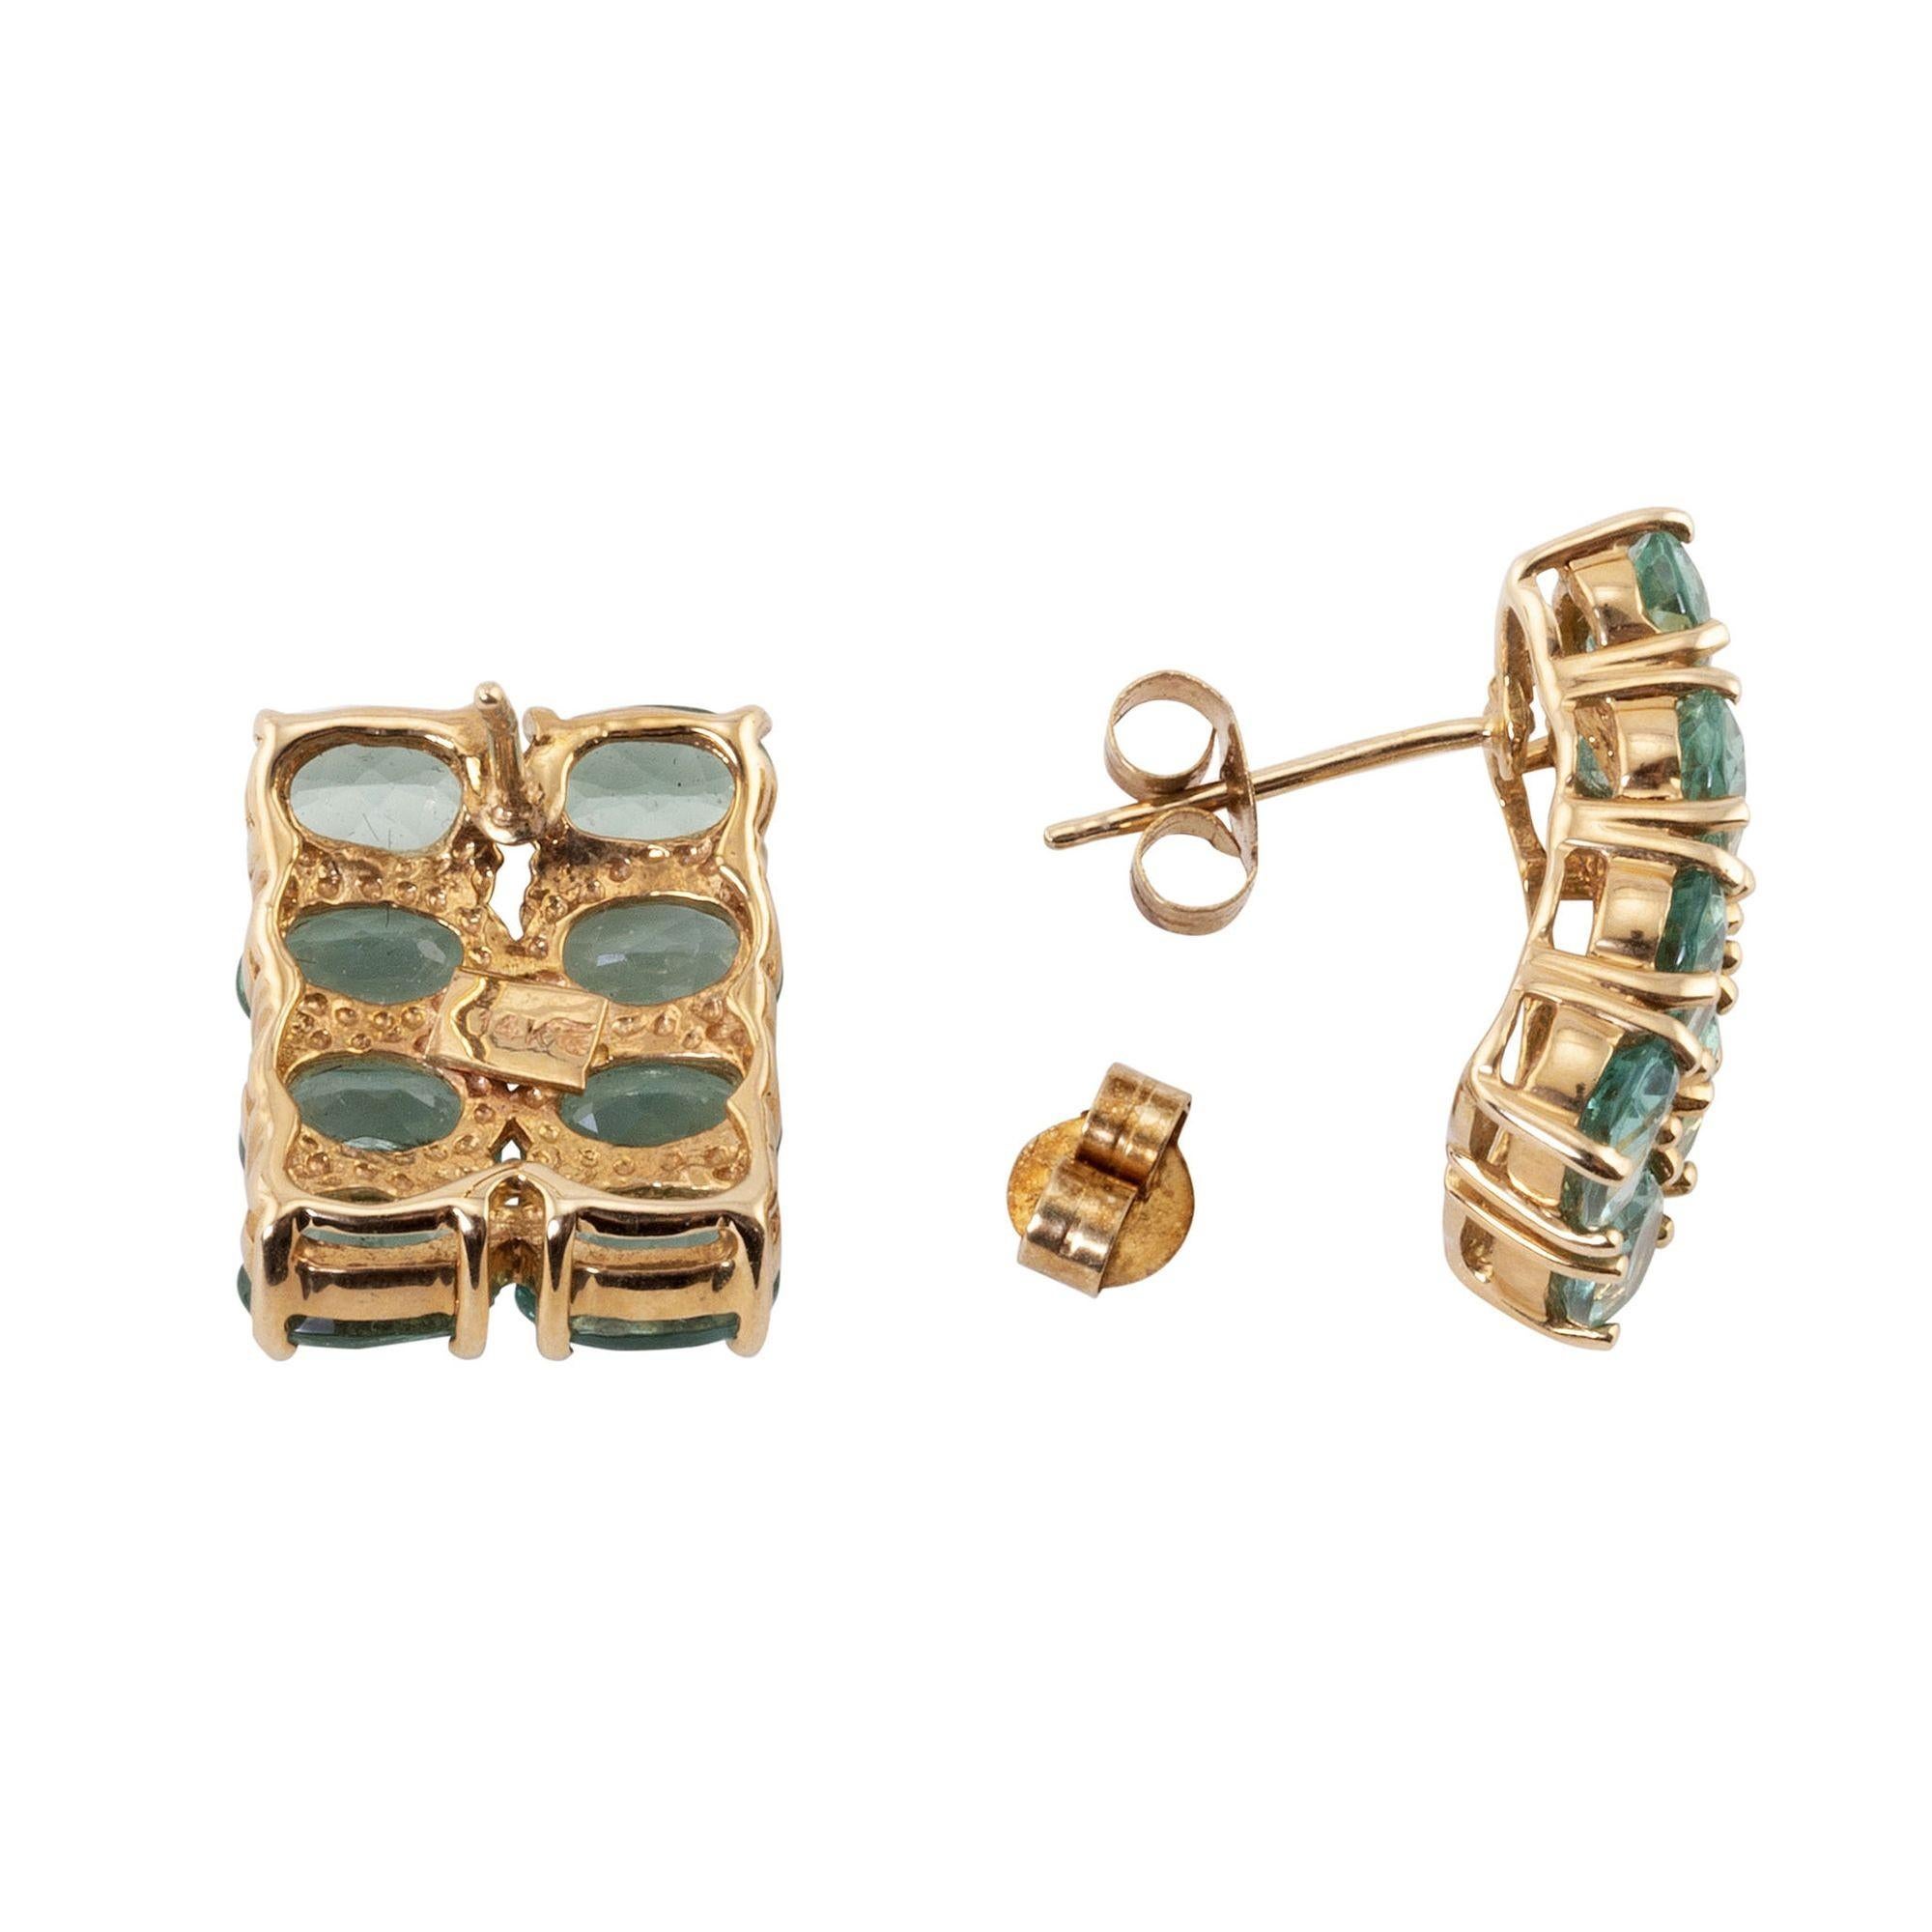 Apatite Earrings In Good Condition For Sale In Solvang, CA